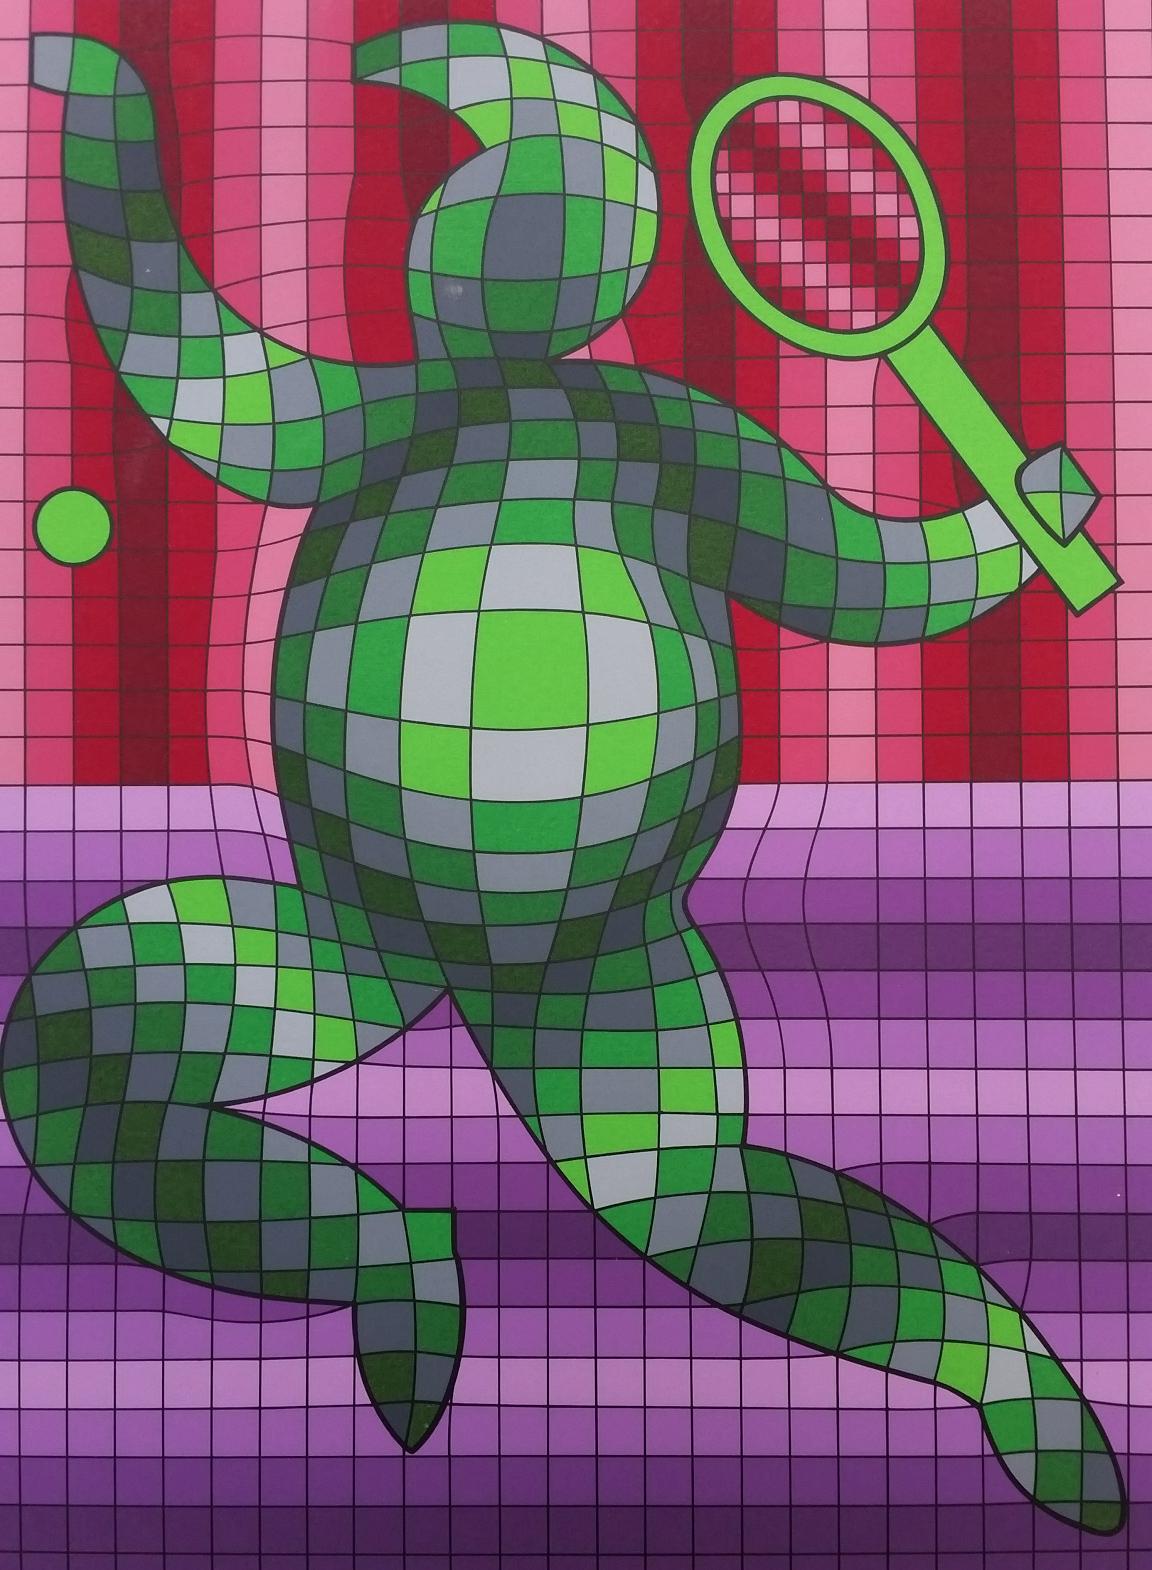 Victor Vasarely Abstract Print - Vasarely - "Tennis Player" - 1977